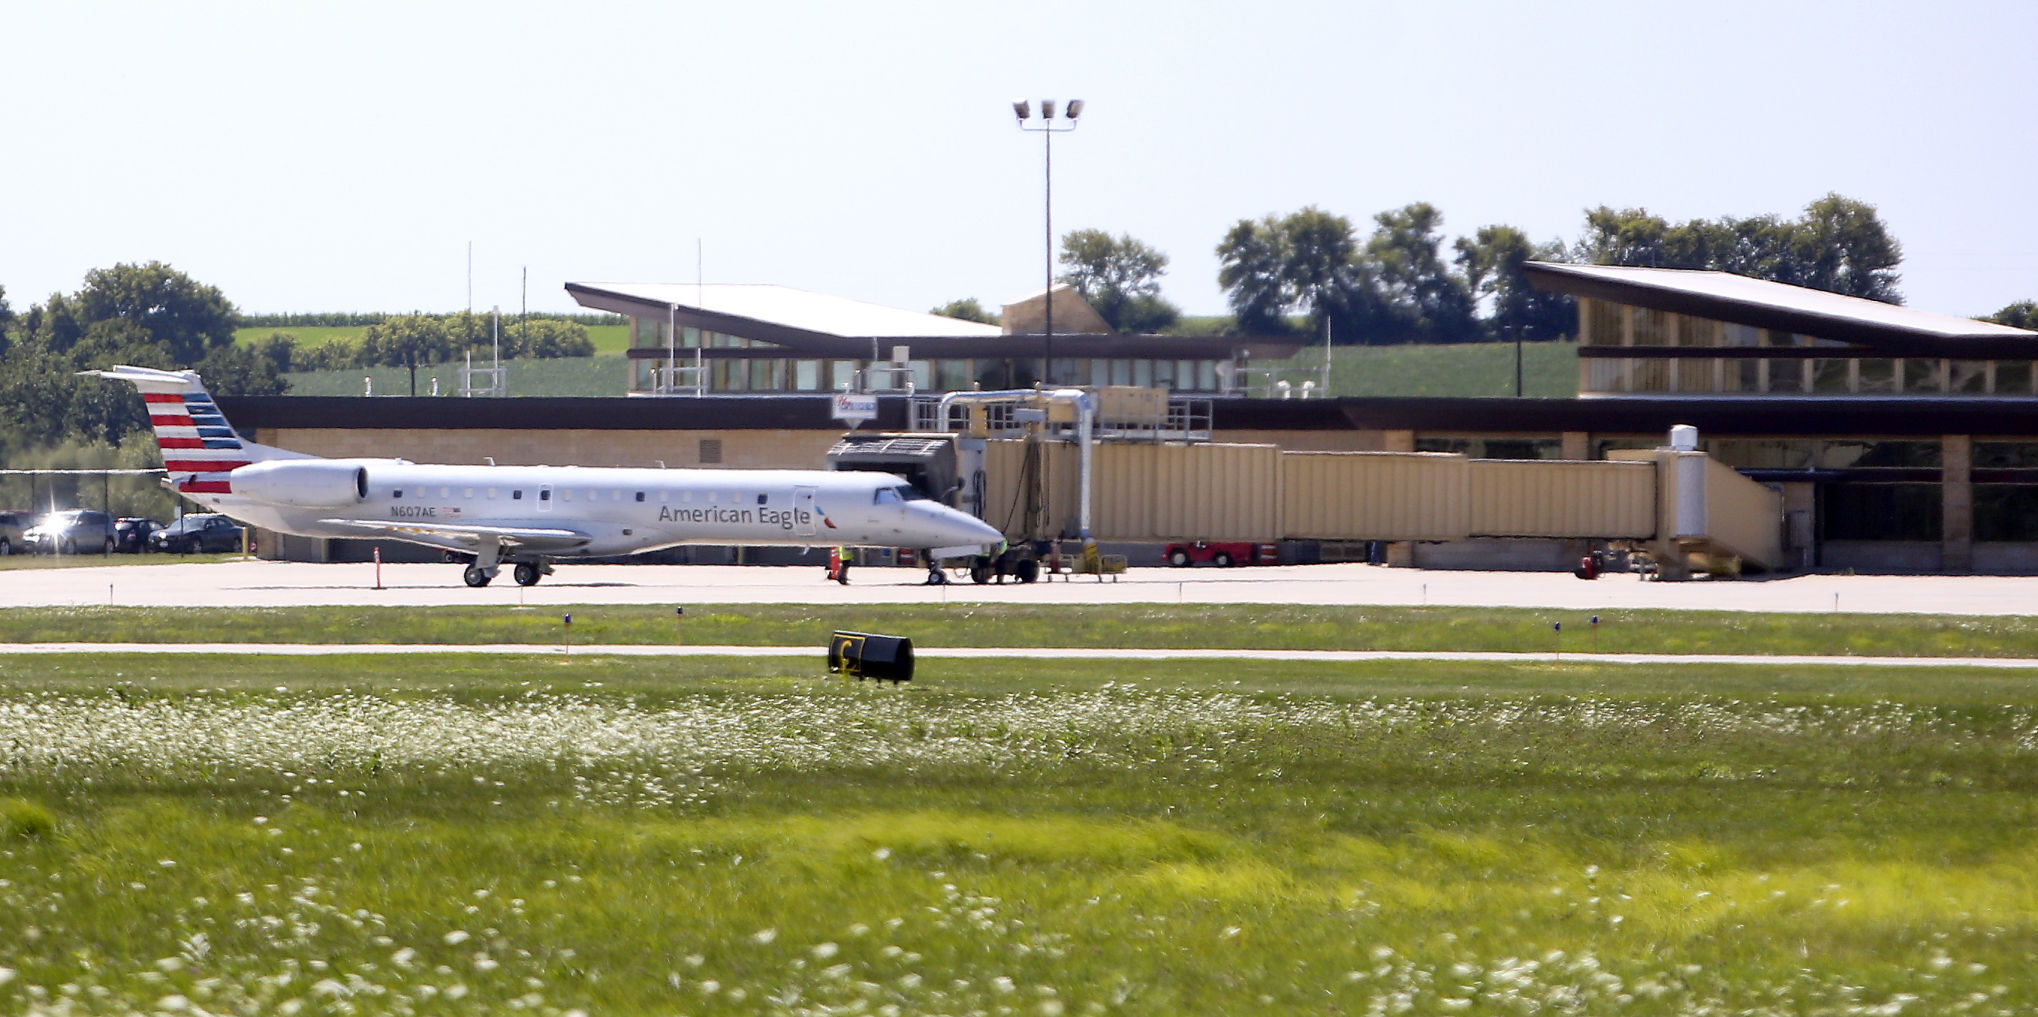 An American Eagle jet pulls up to the terminal at the Dubuque Regional Airport on Thursday. PHOTO CREDIT: Dave Kettering